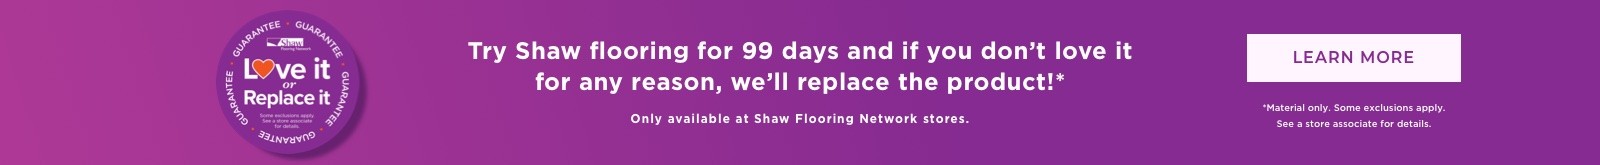 Shaw Love It Or Replate it Guarantee - Try Shaw flooring for 99 days and if you don’t love it for any reason, we’ll replace the product!* - Learn More Only available at Shaw Flooring Network stores. *Material only. Some exclusions apply. See a store associate for details.